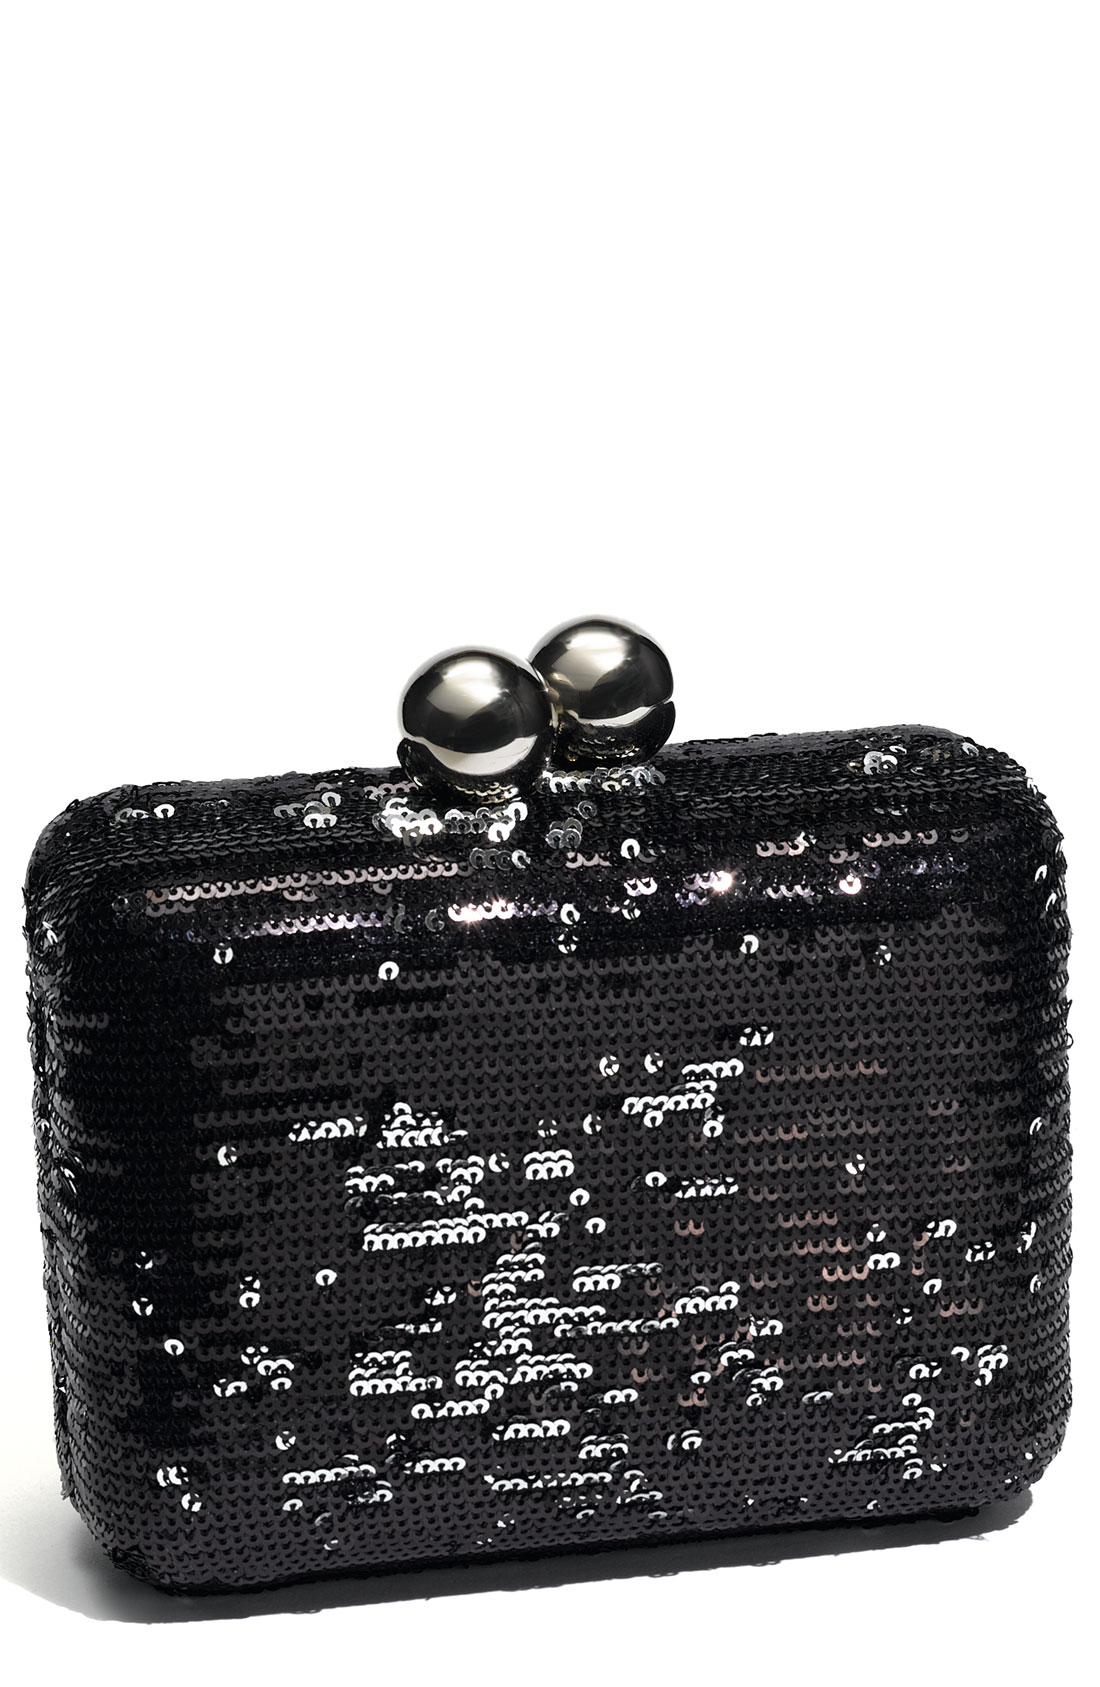 Steven By Steve Madden Sequined Box Clutch in Black (black/ silver) | Lyst